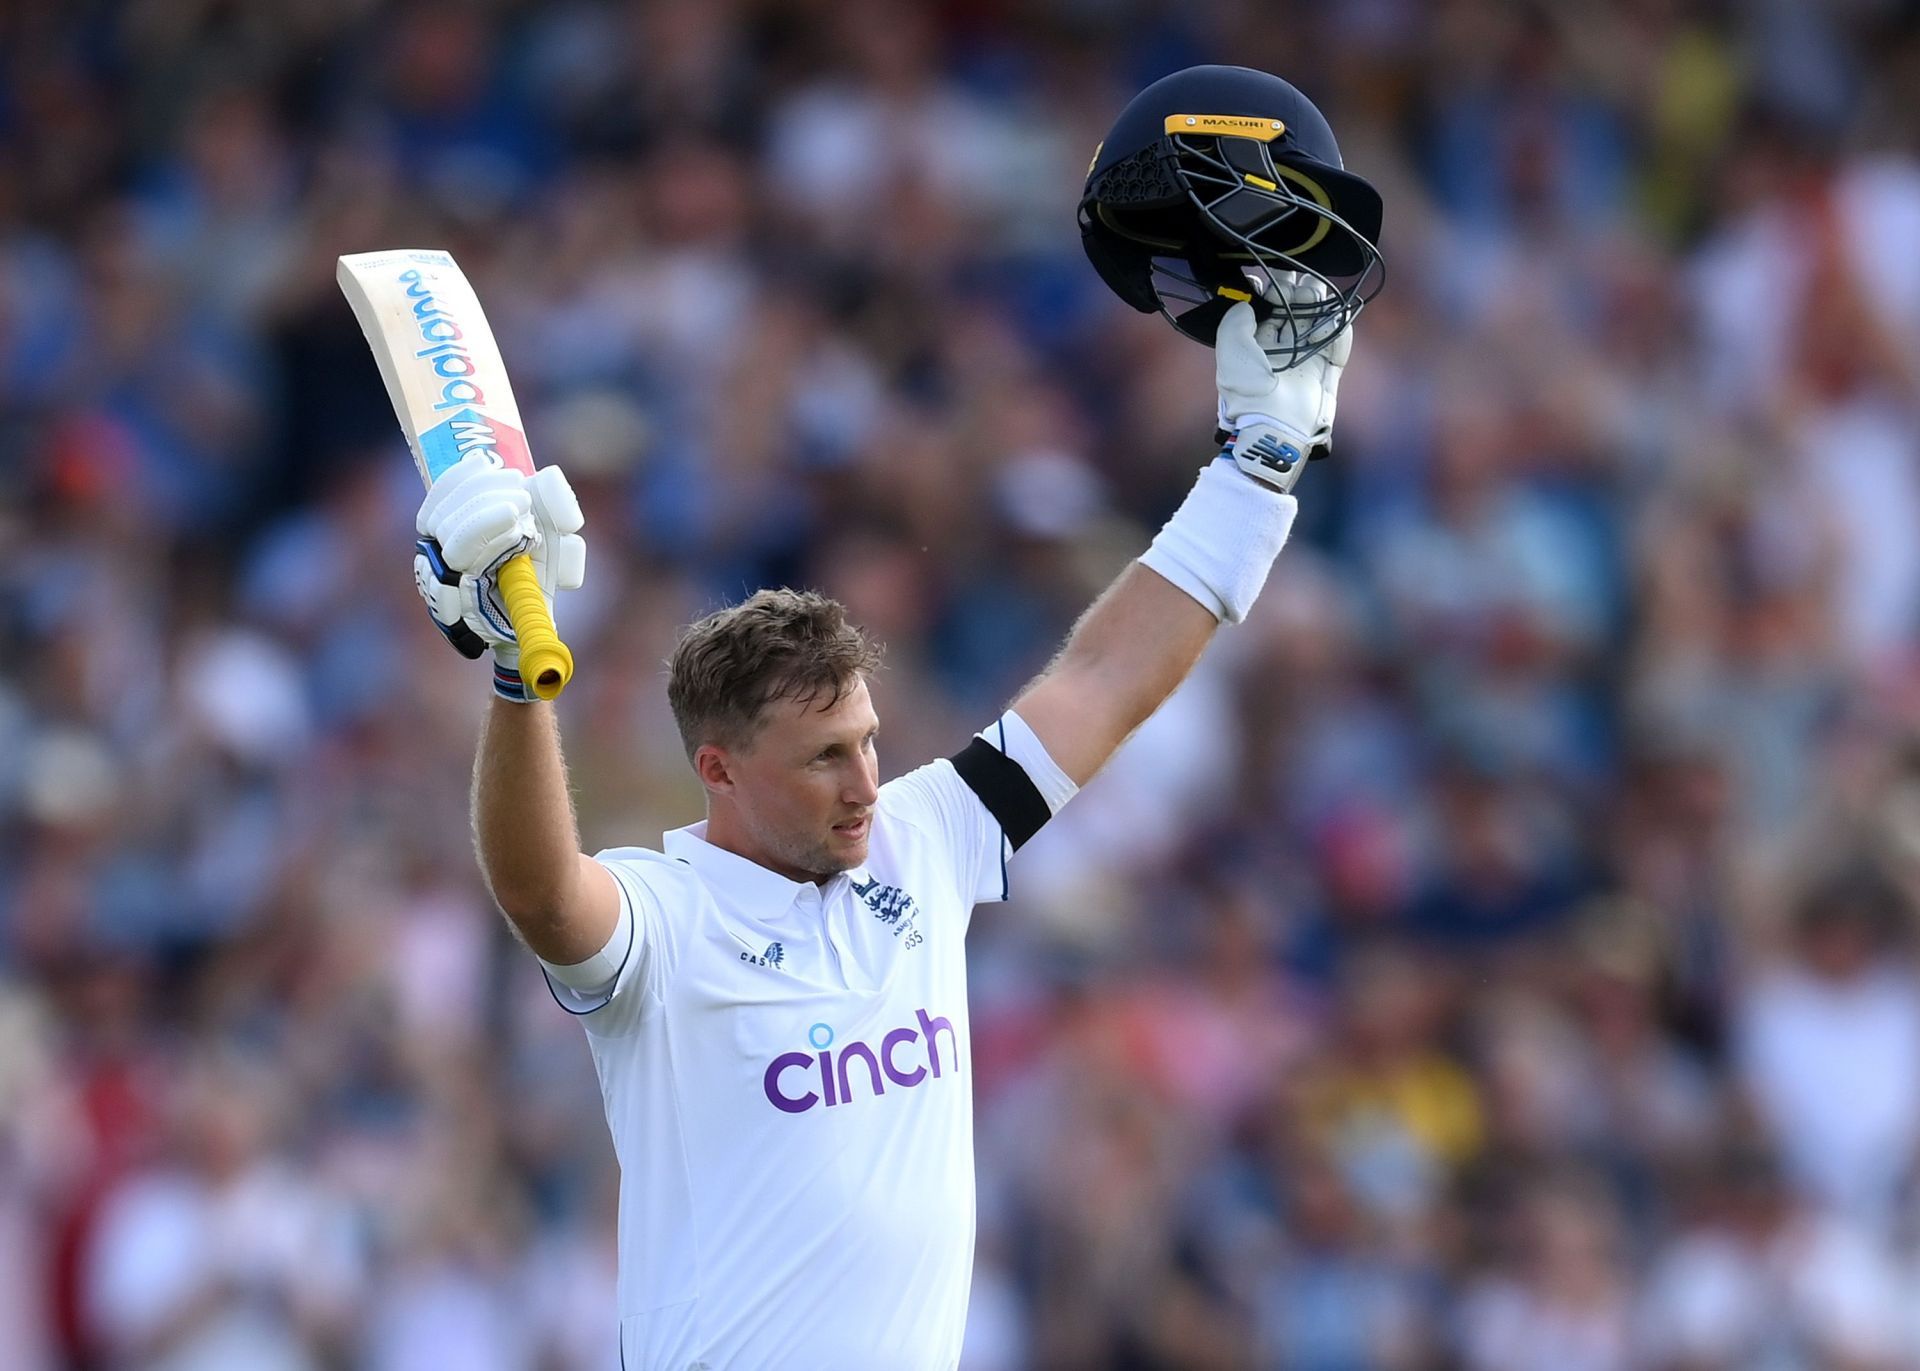 The 32-year-old celebrates his ton against England at Edgbaston. (Pic: Getty Images)